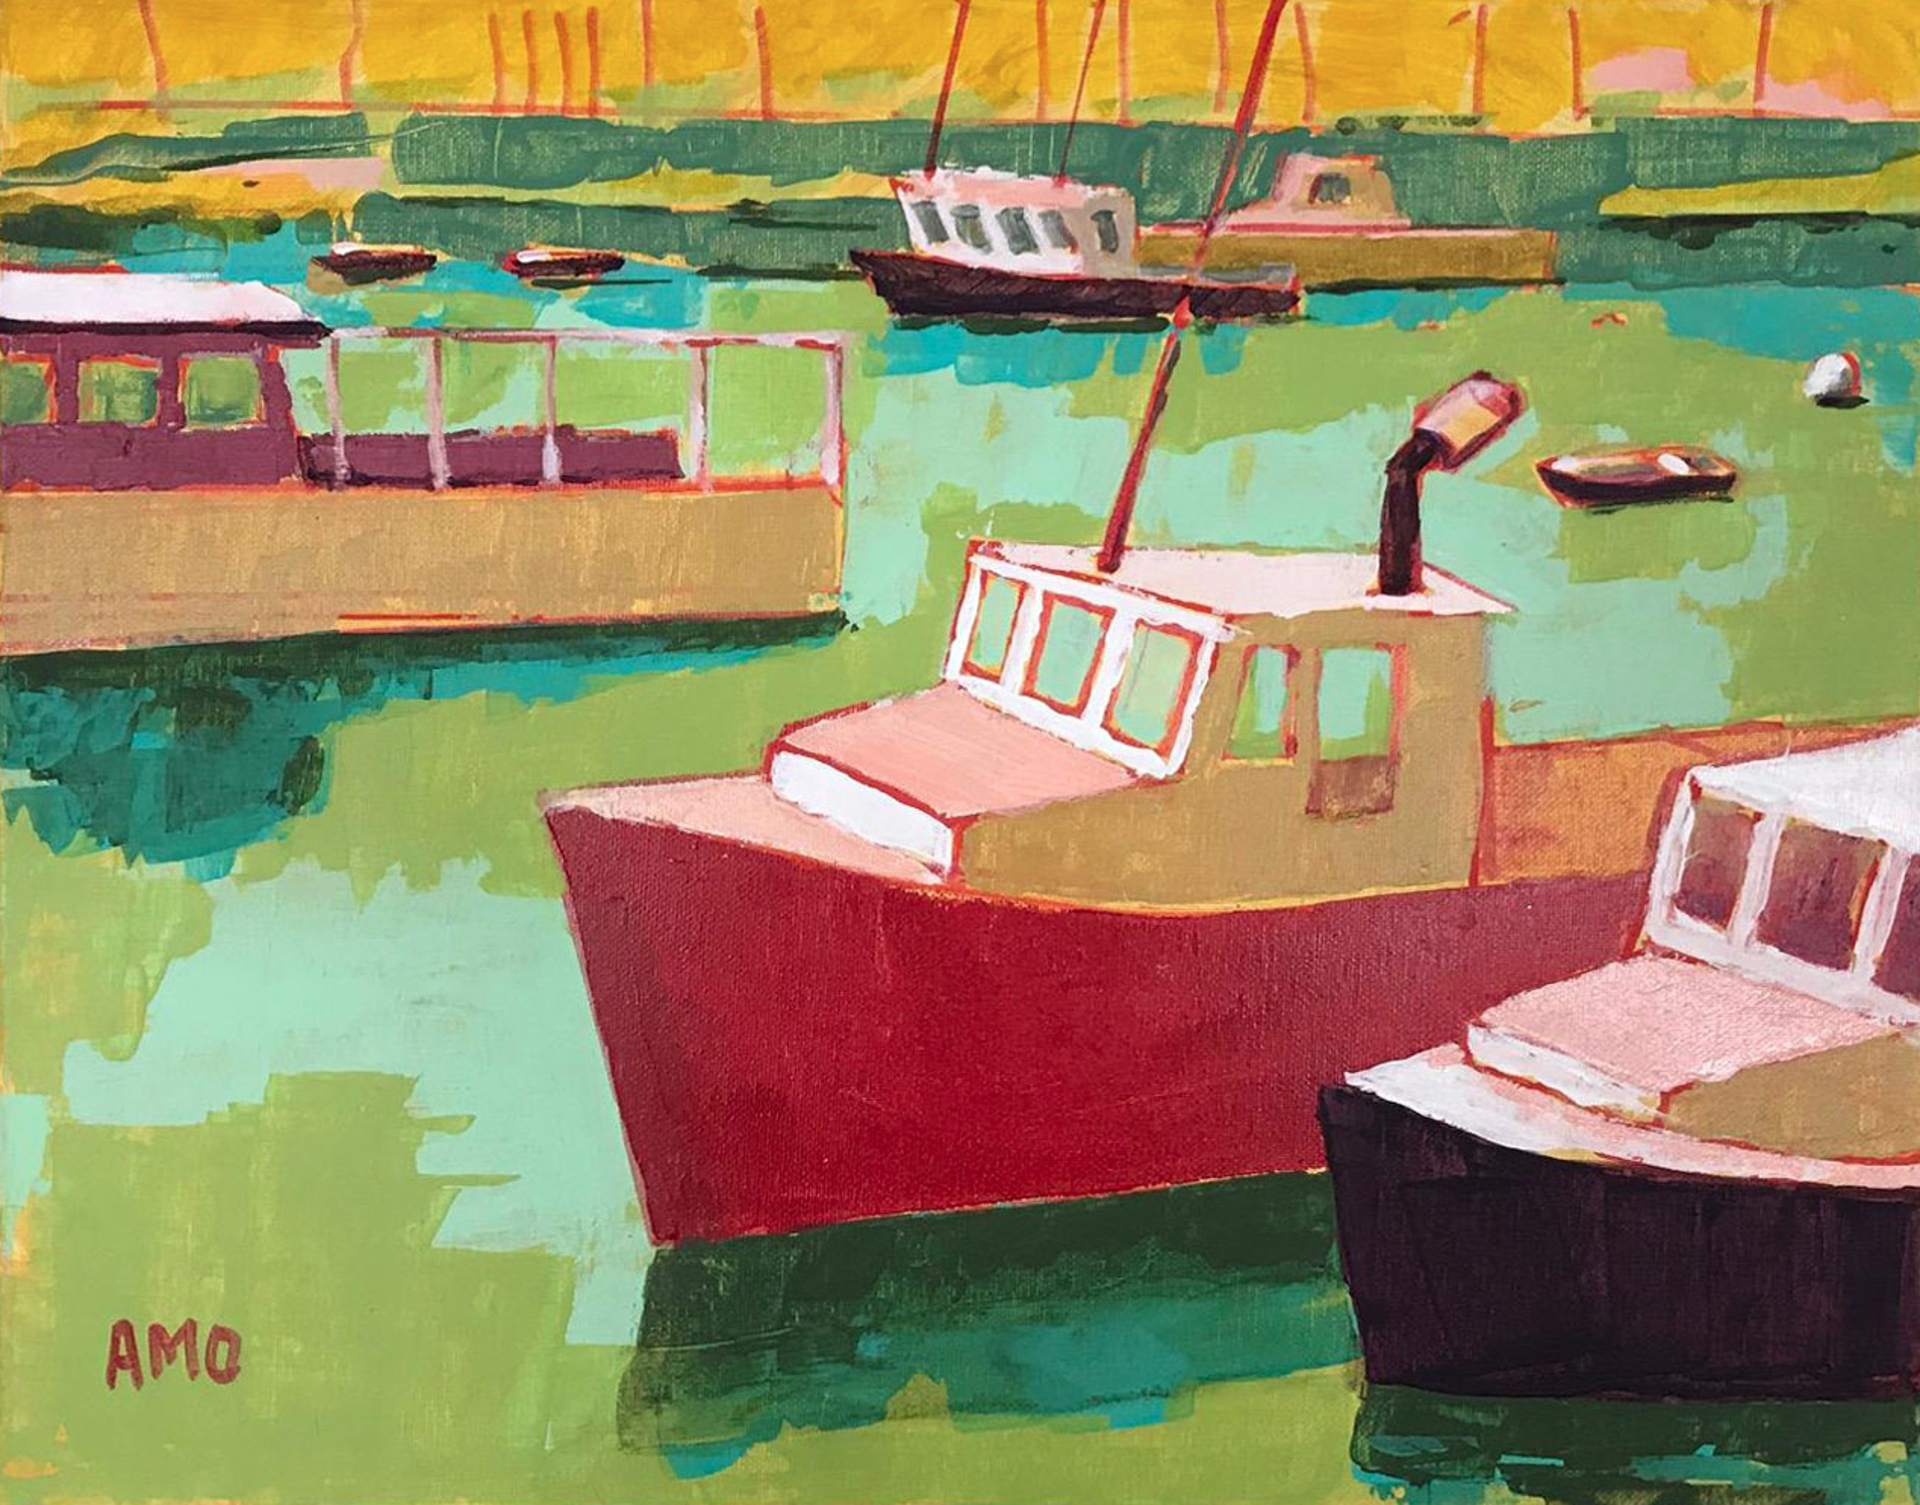 Working Boats at Rest by Ann Marie O'Dowd